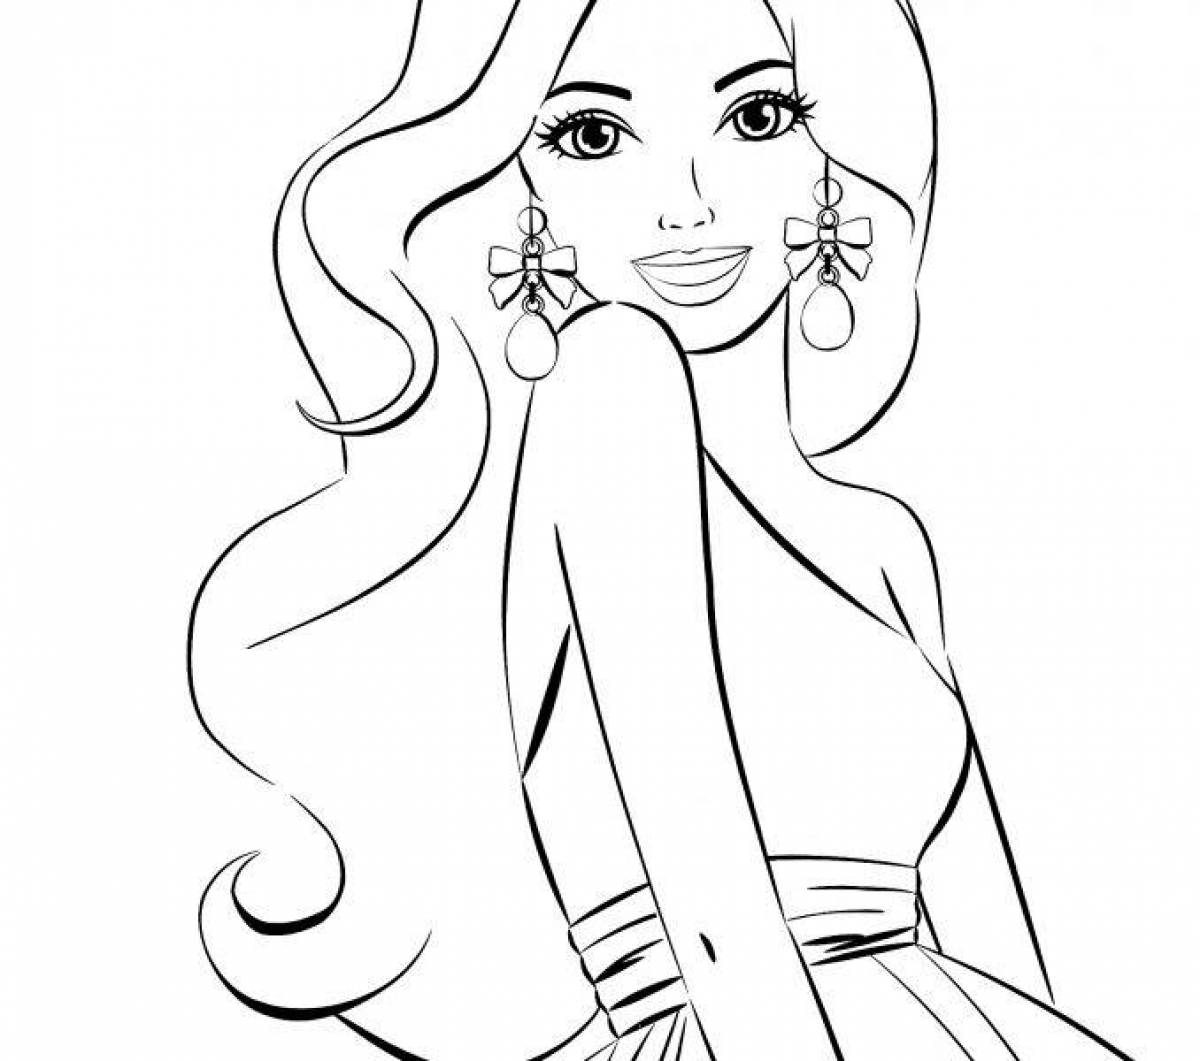 Cute barbie face coloring page